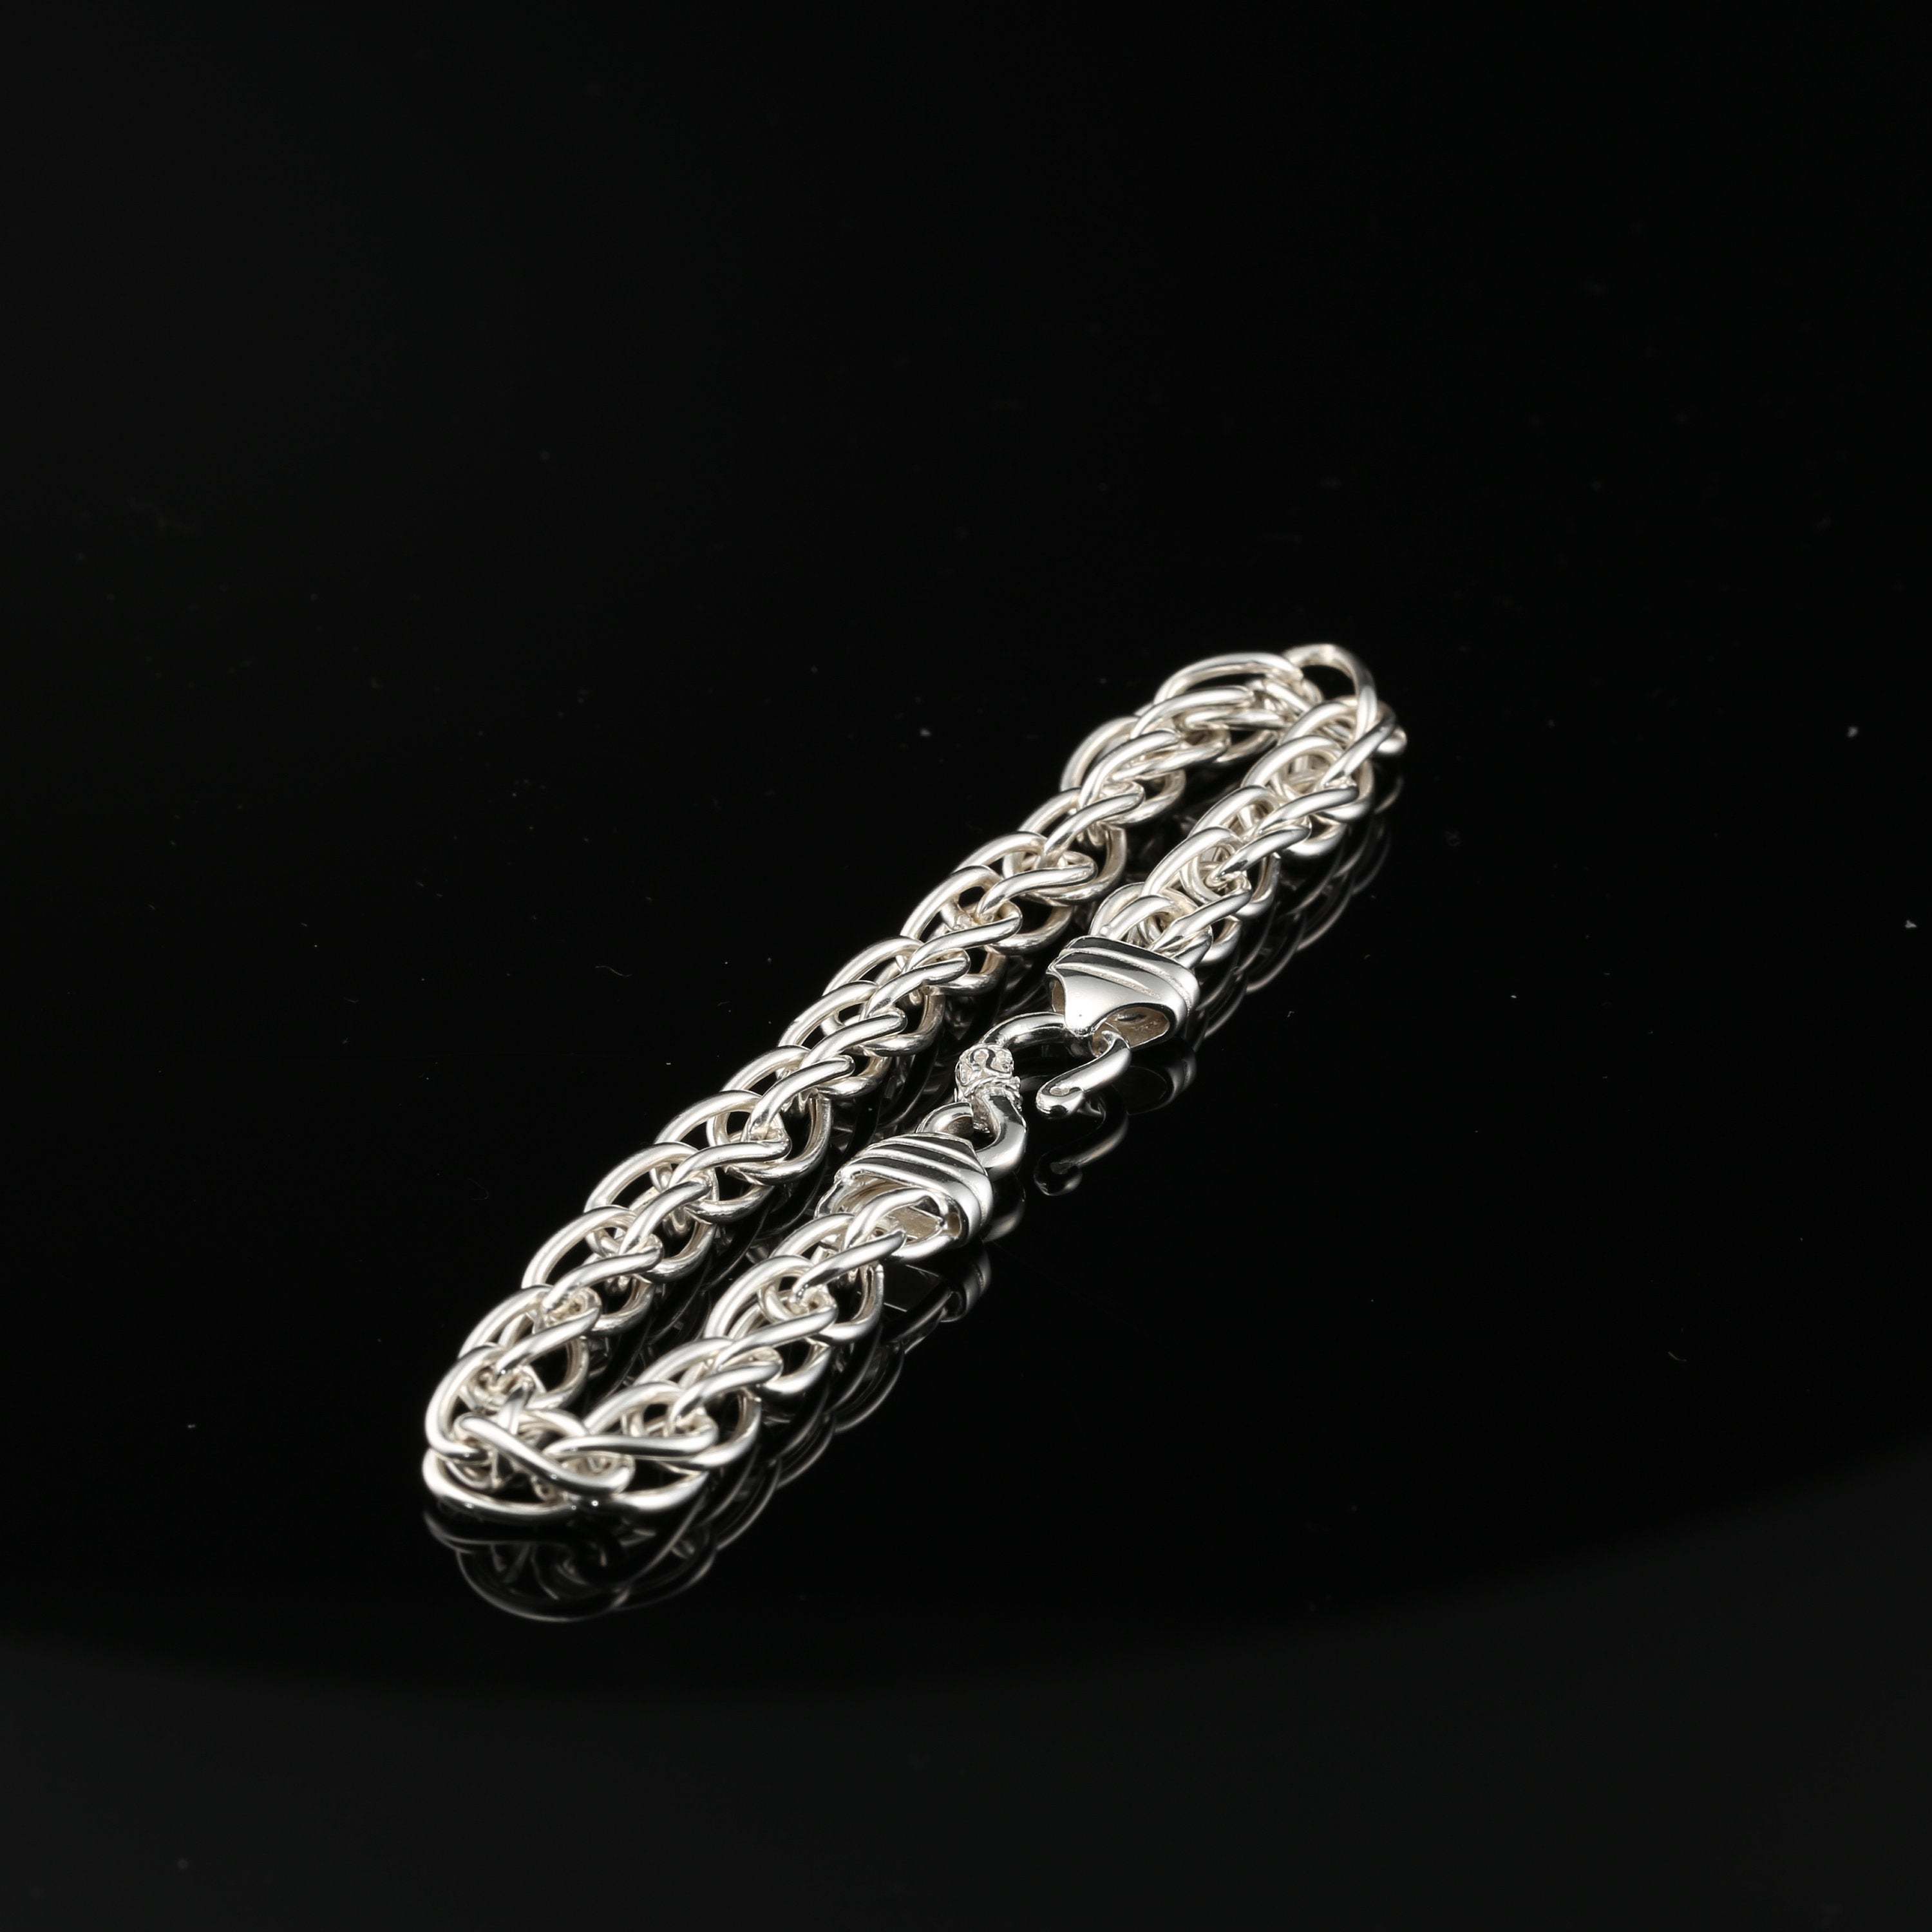 Sterling Silver Handmade Byzantine Chain Bracelet with S-Hook Clasp, 8